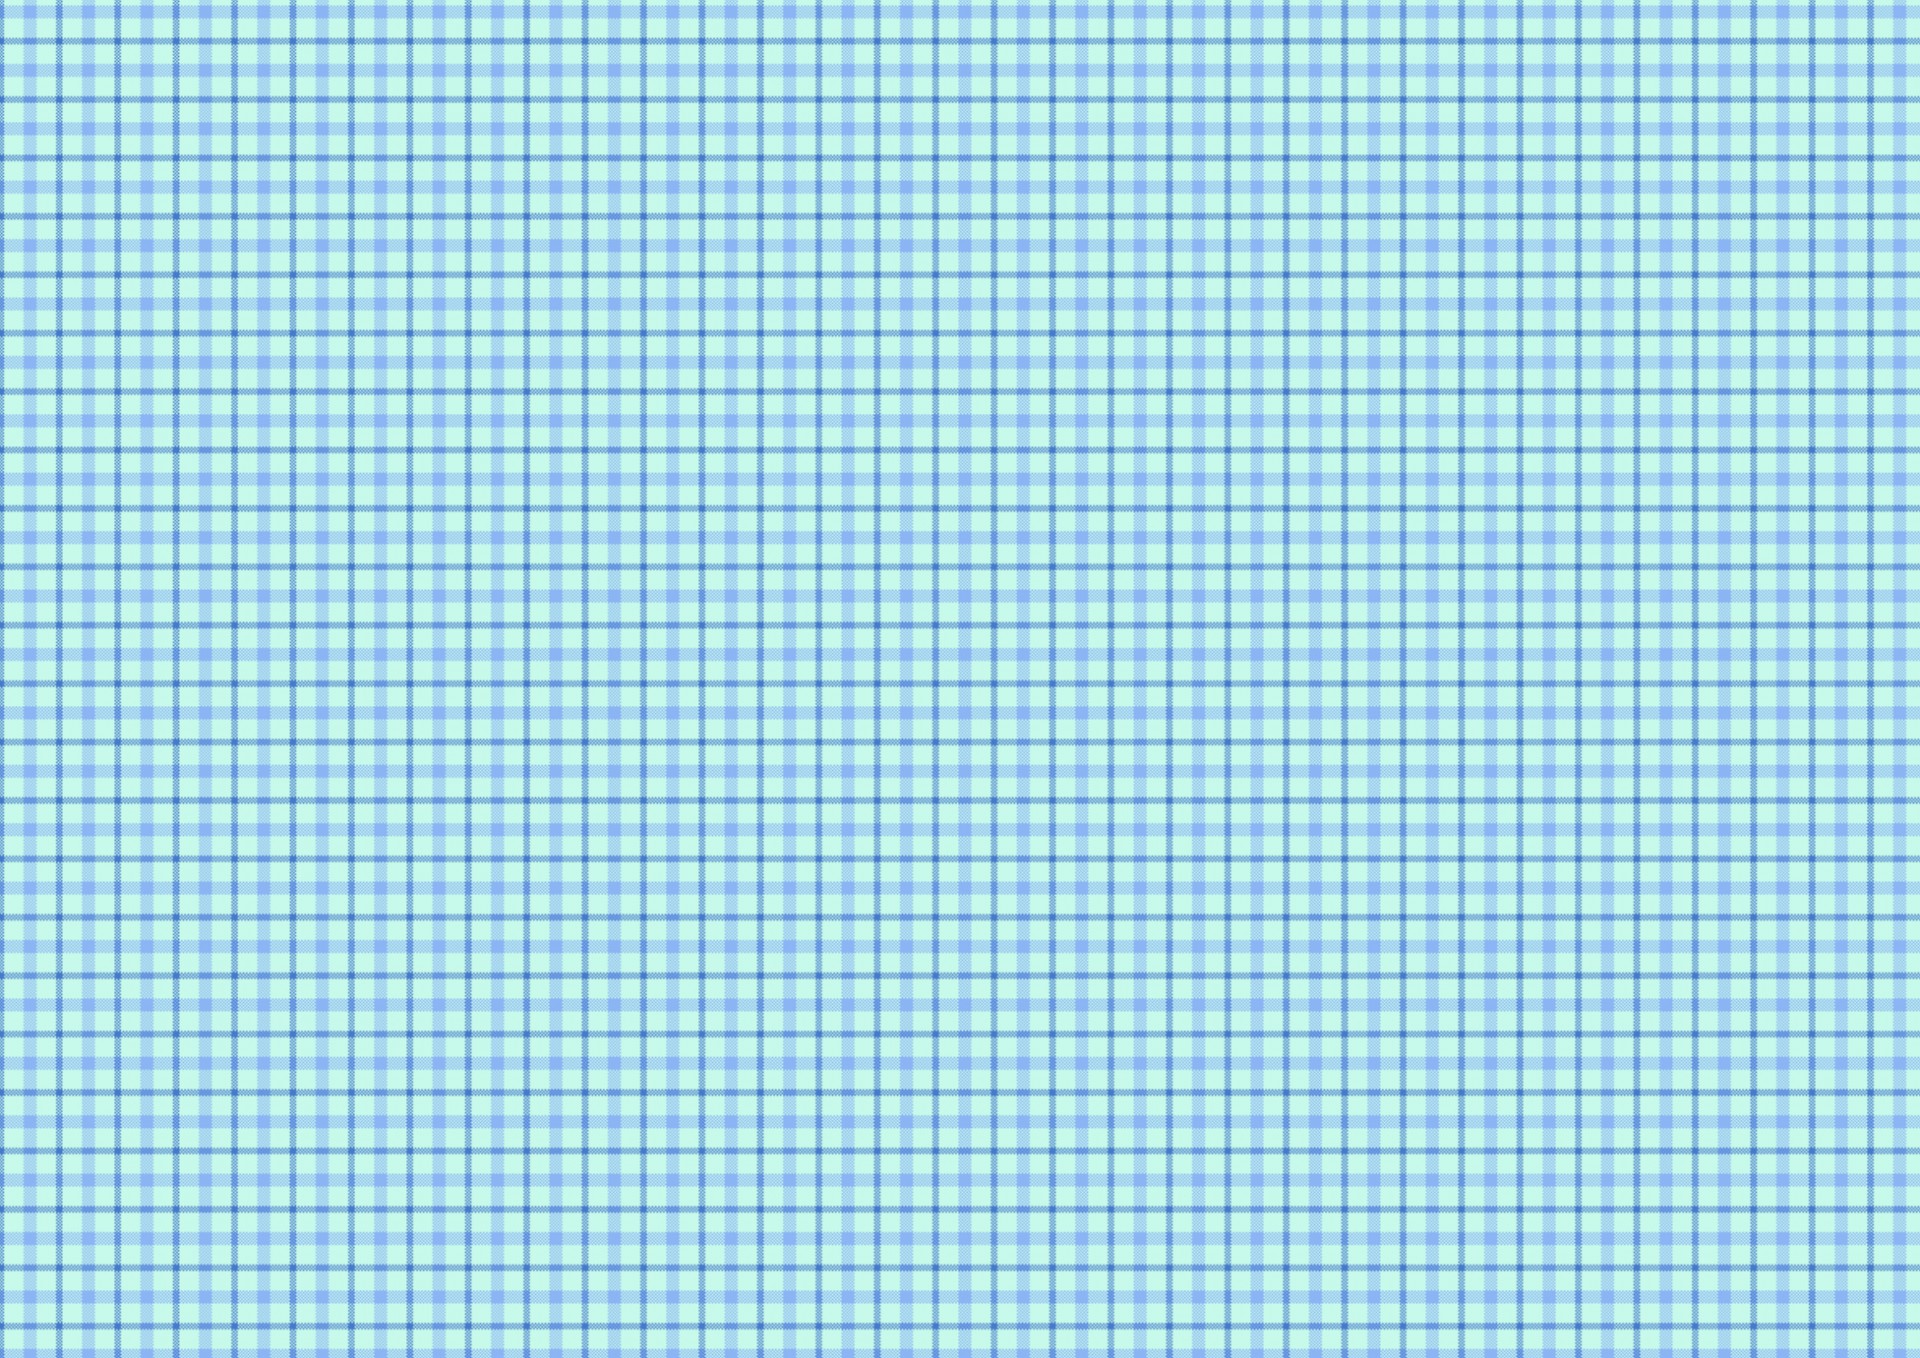 blue gingham / plaid backing paper papers sheet free photo